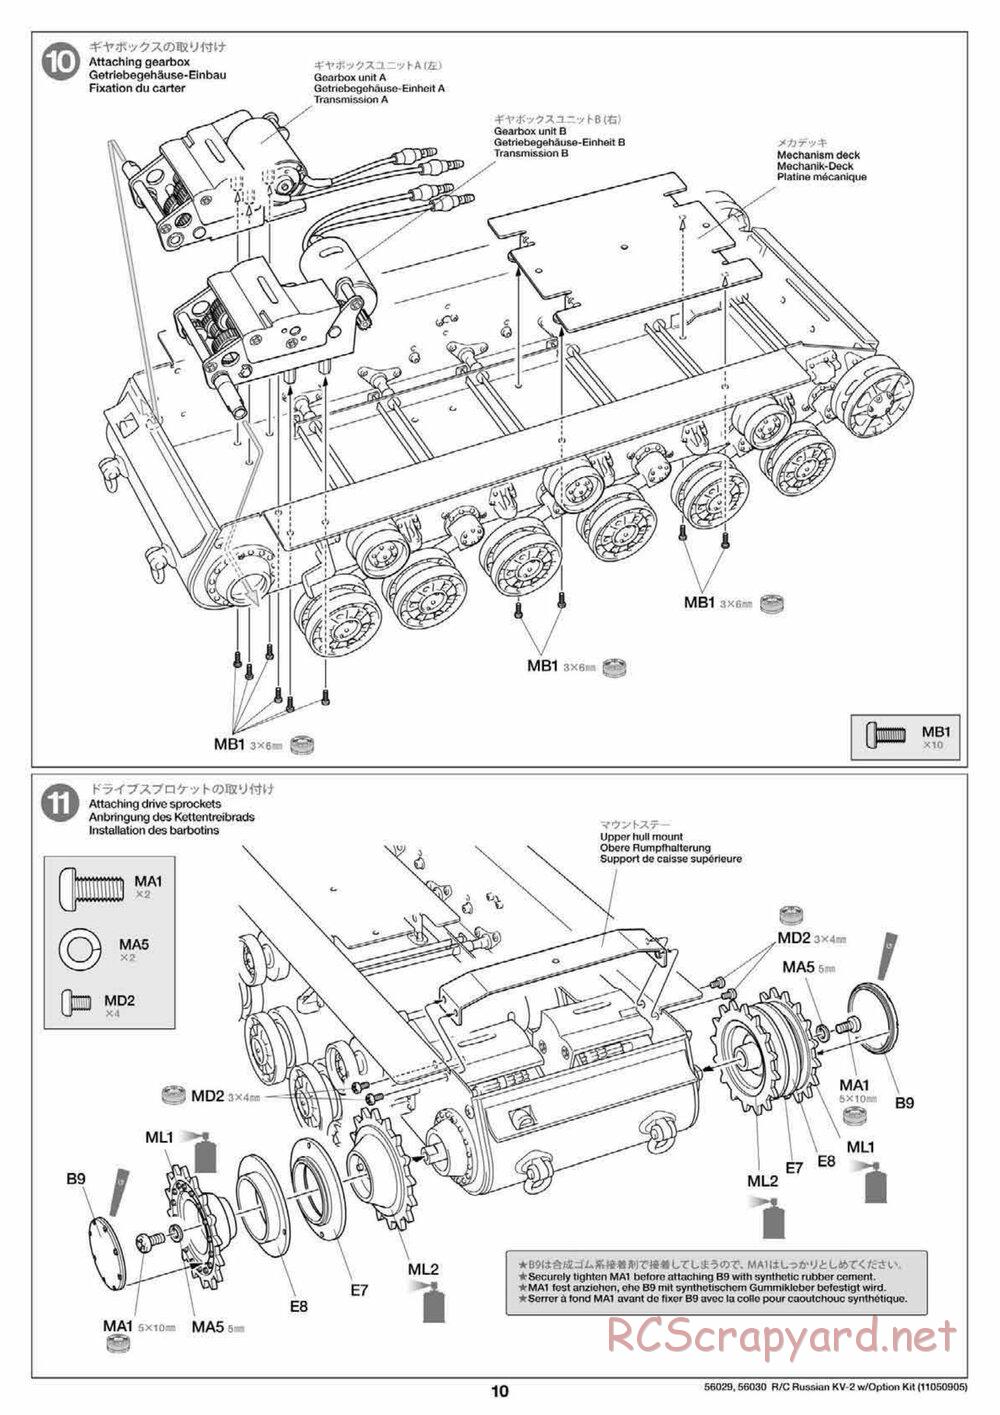 Tamiya - Russian Heavy Tank KV-2 Gigant - 1/16 Scale Chassis - Manual - Page 10